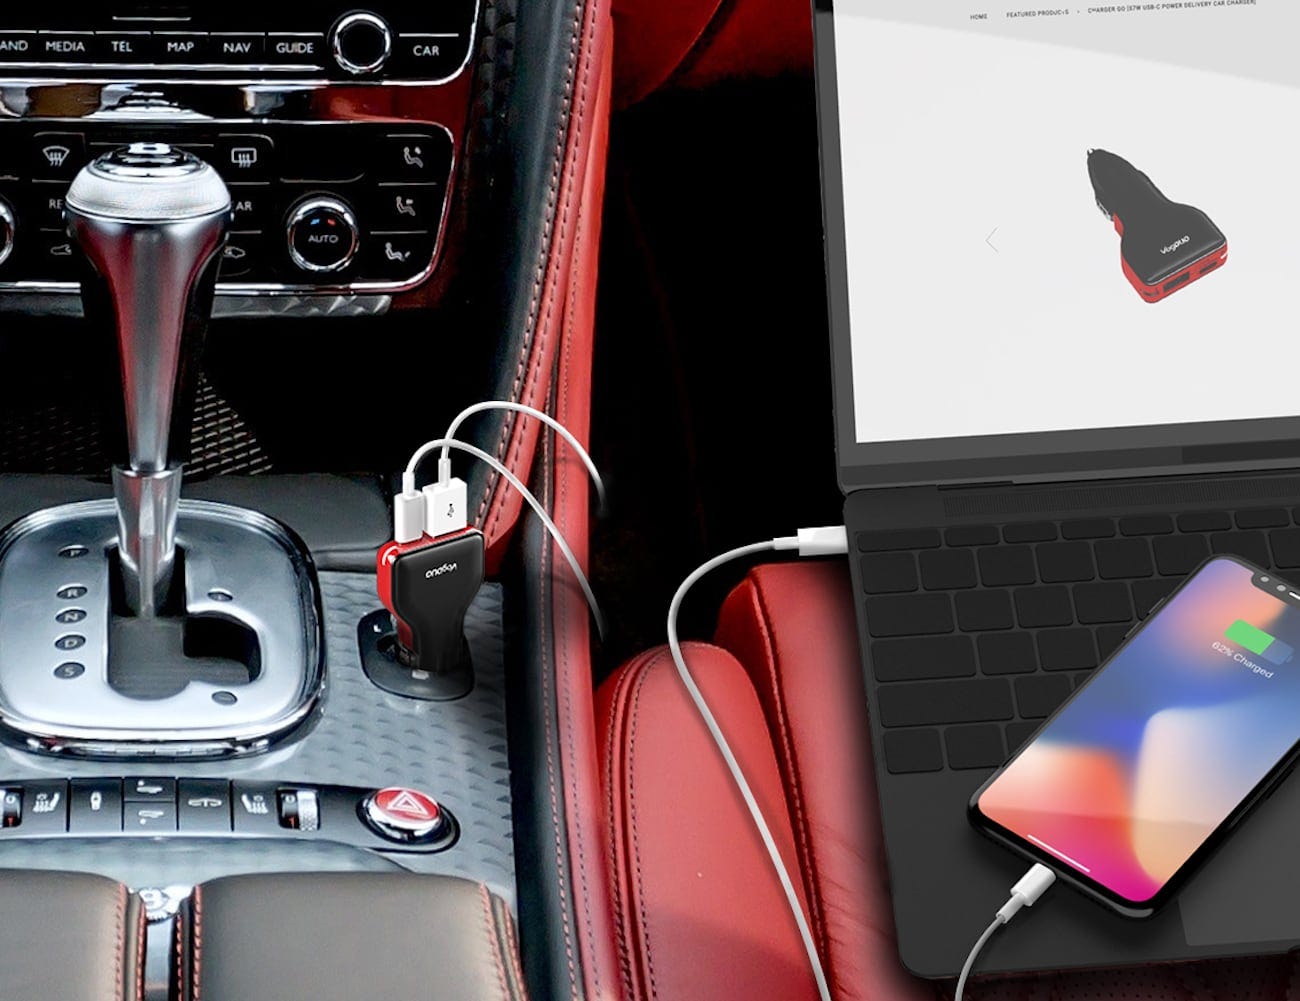 6 Really Cool Gadgets For Your Car You'll Want To Check Out